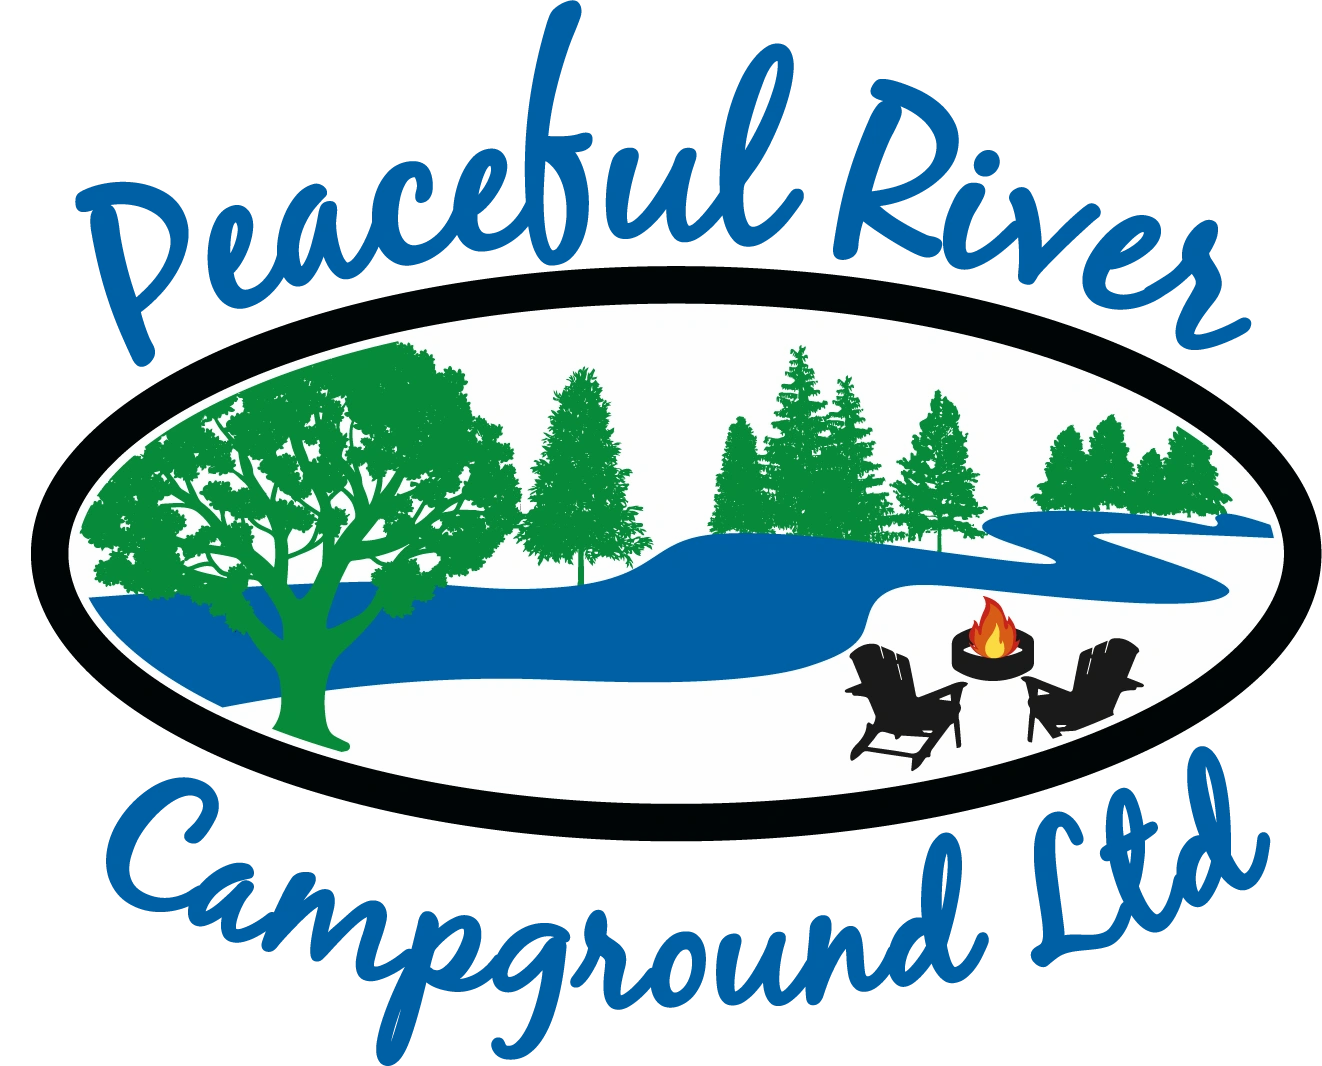 Peaceful River Campground